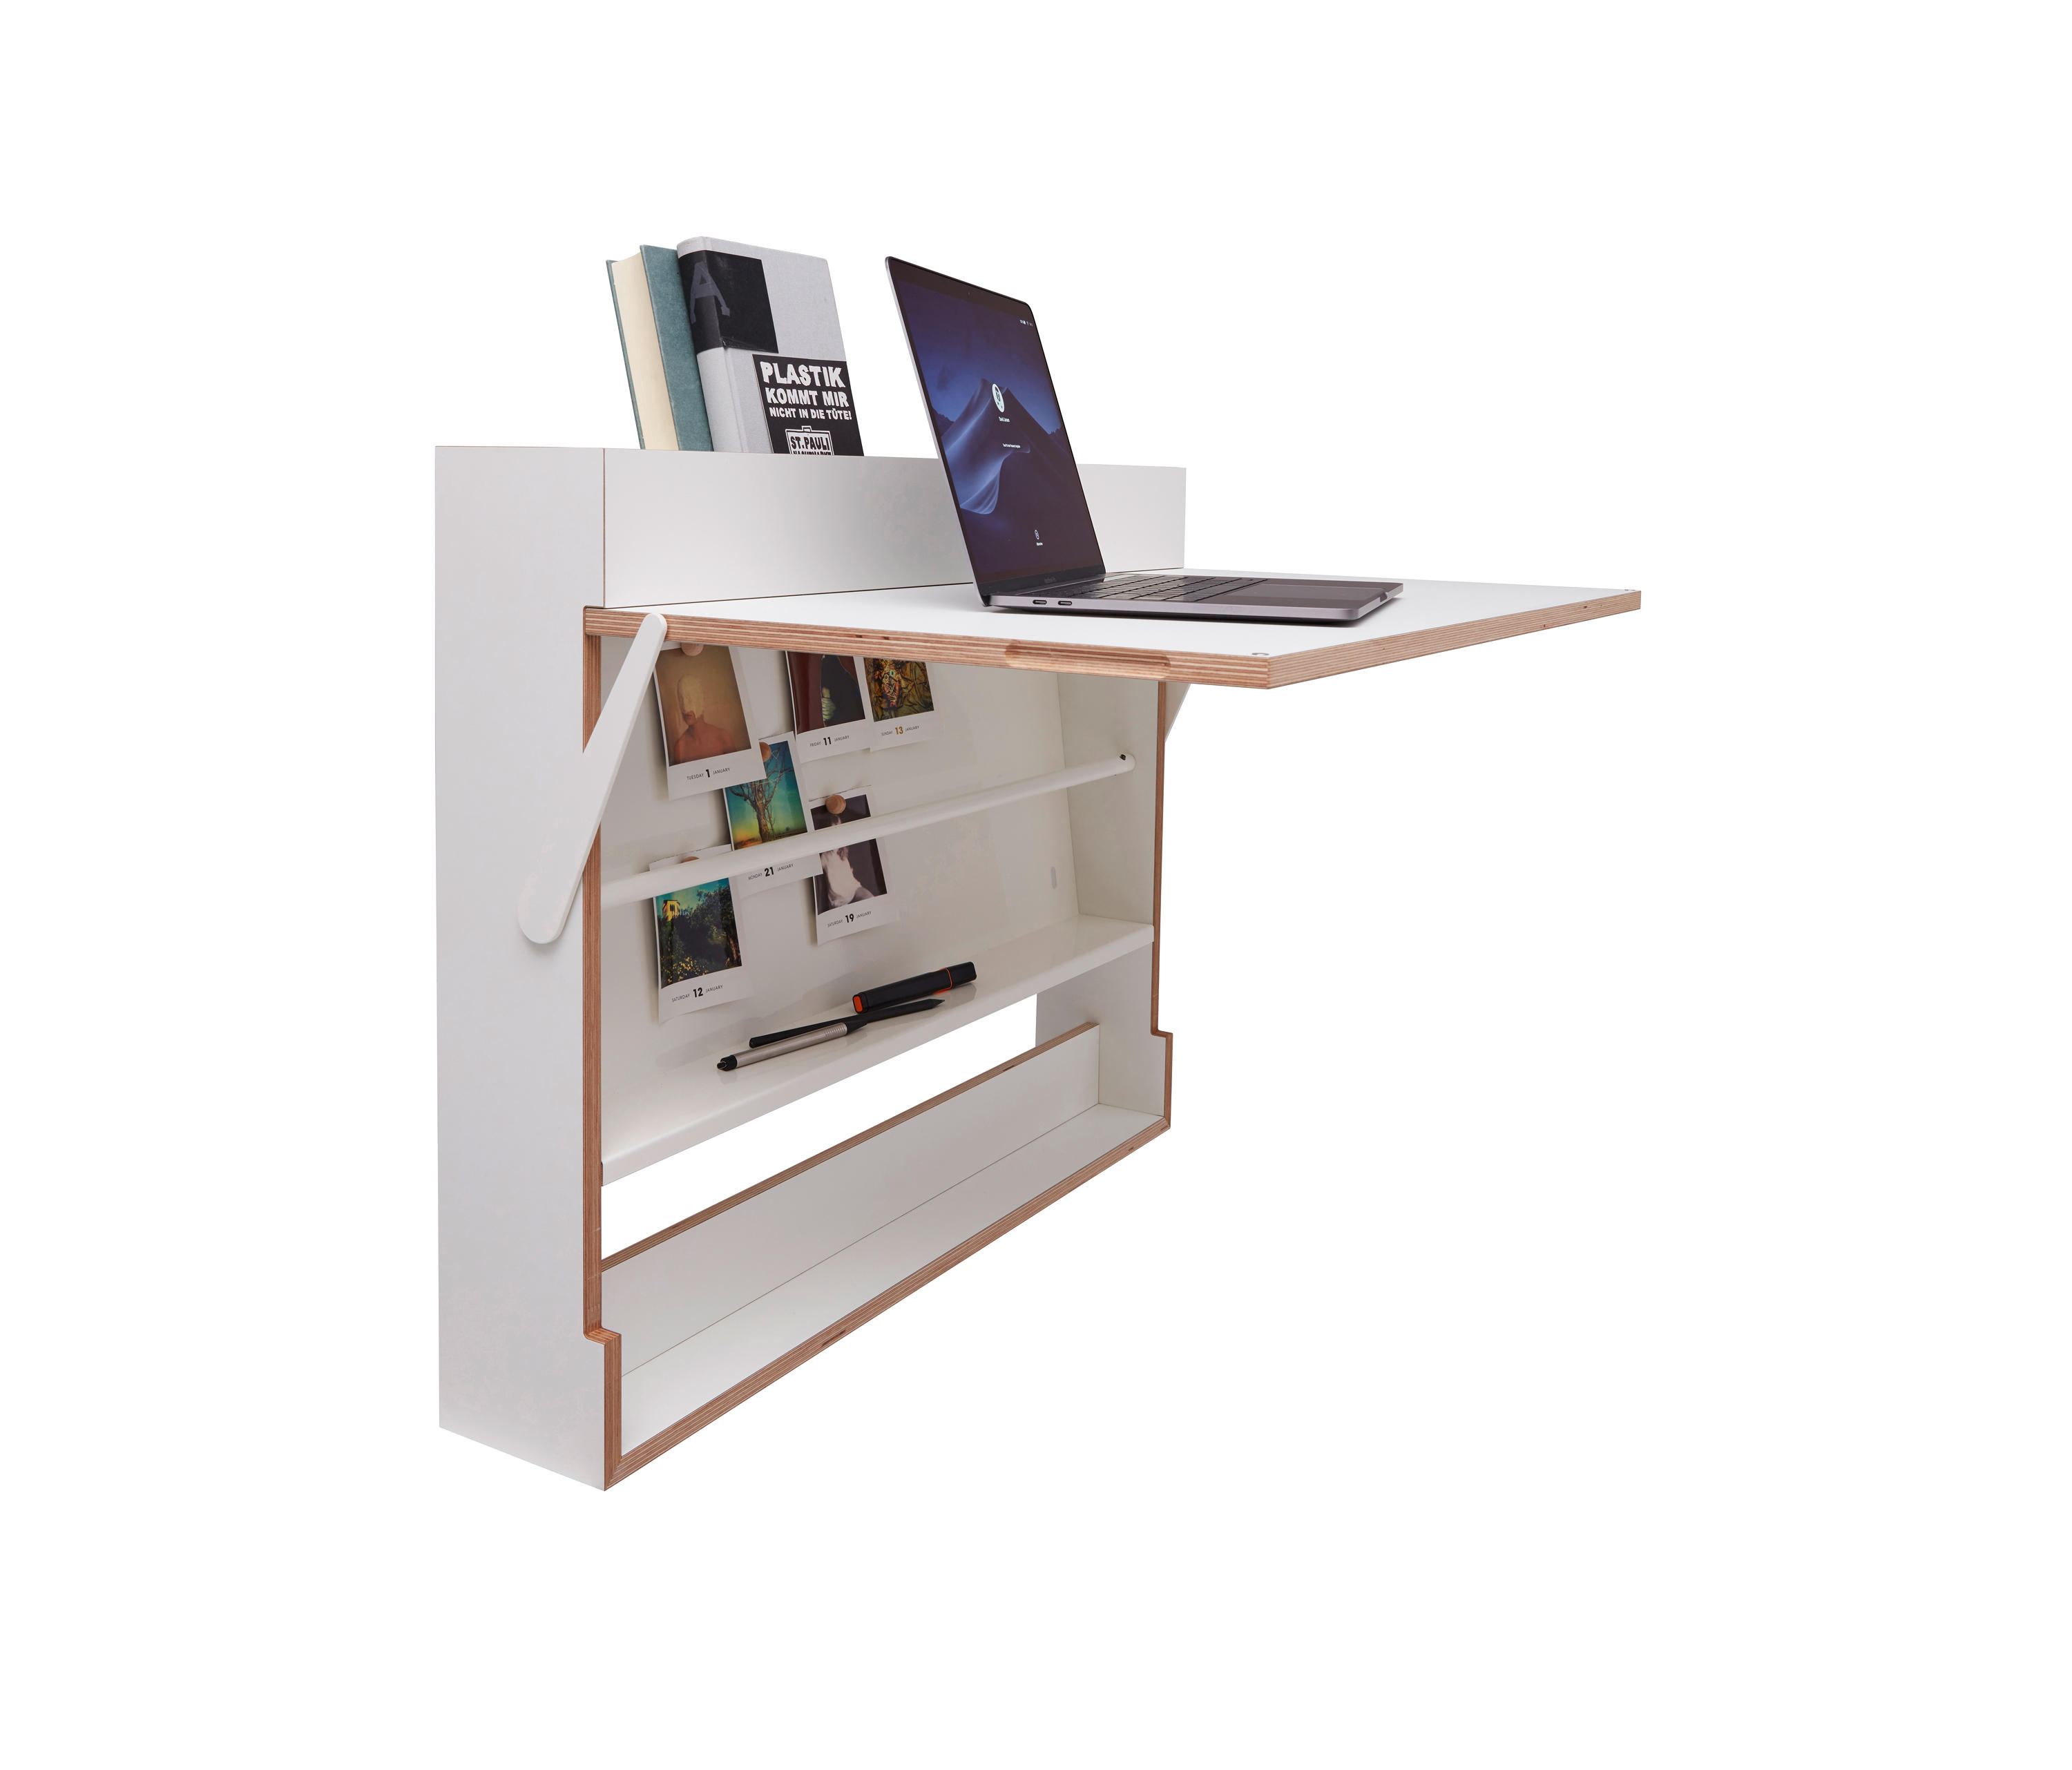 WORKOUT - Console tables from Müller small living | Architonic